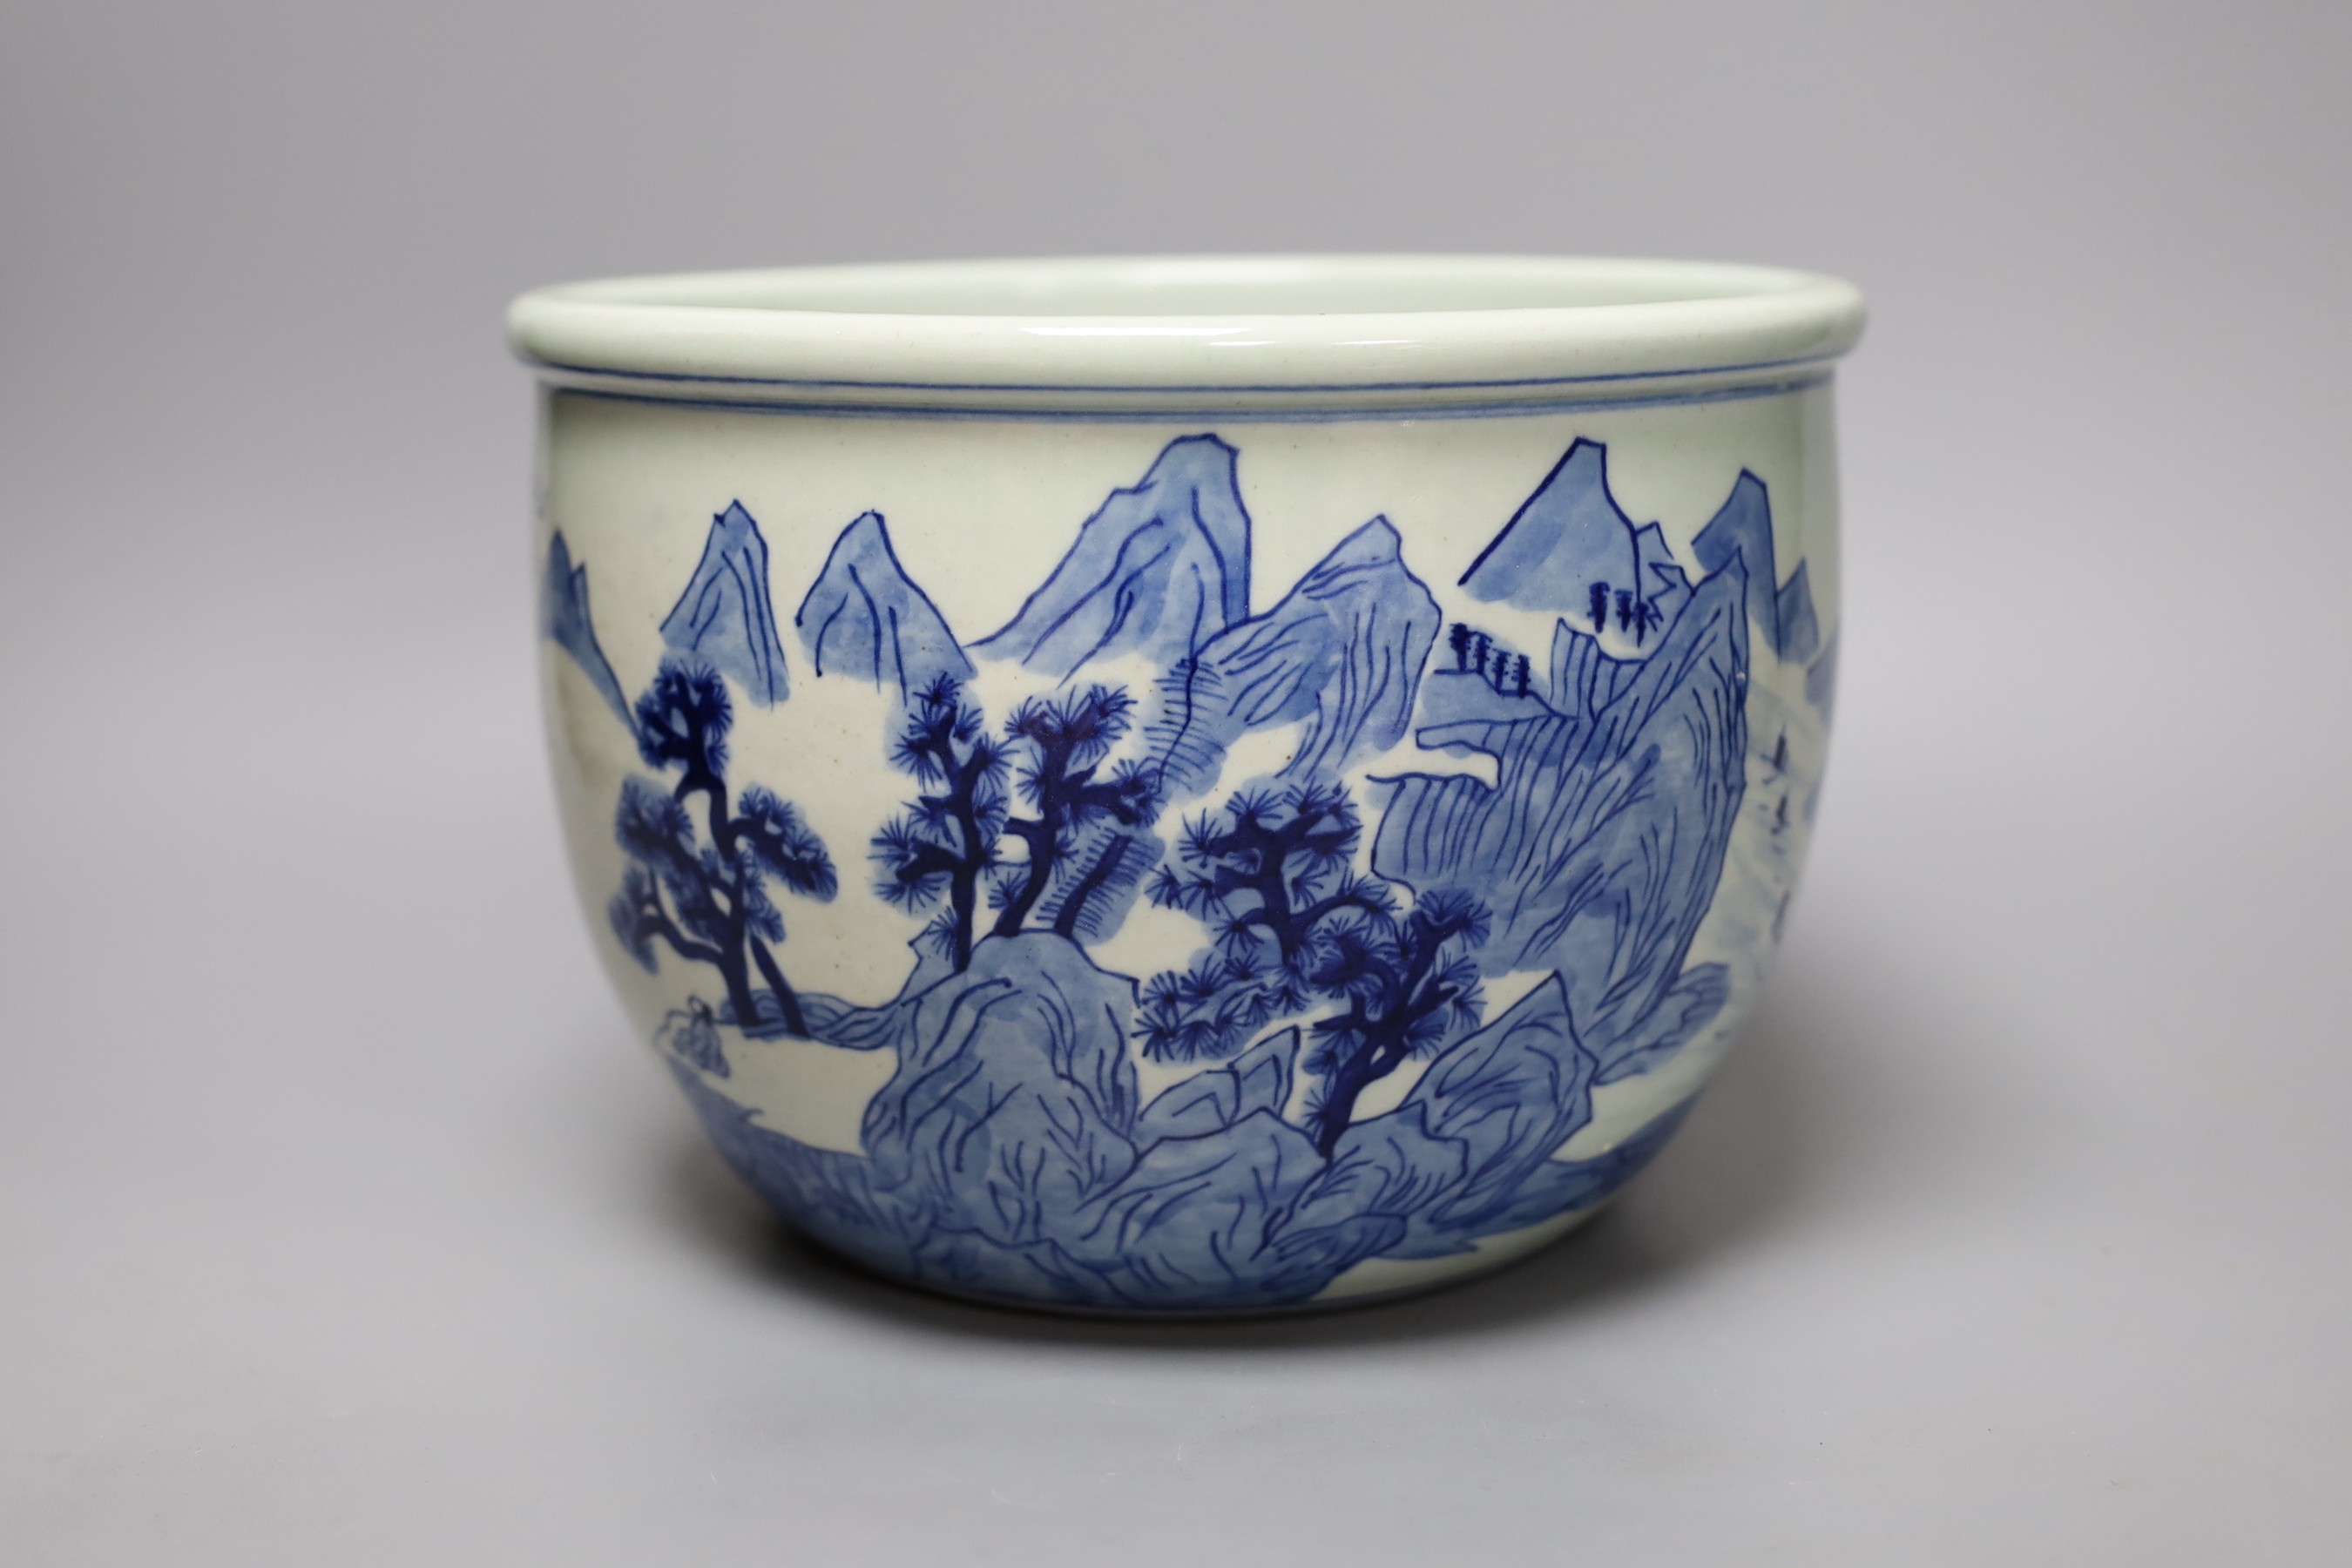 A late 19th century Chinese blue and white planter, 23cm diameter